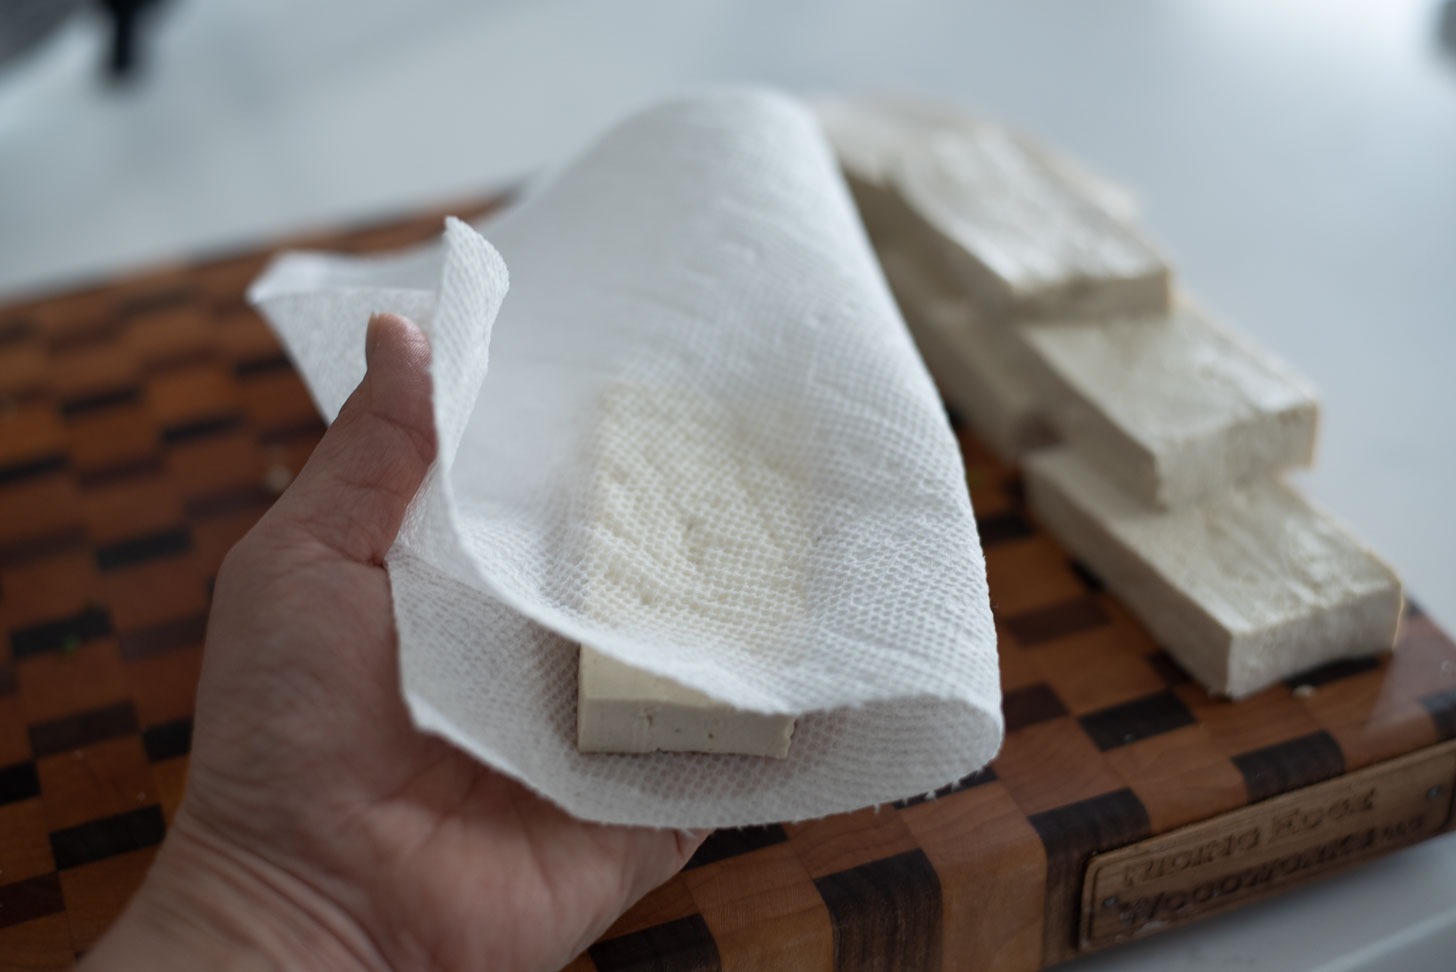 Pressing a slice of tofu with paper towel.